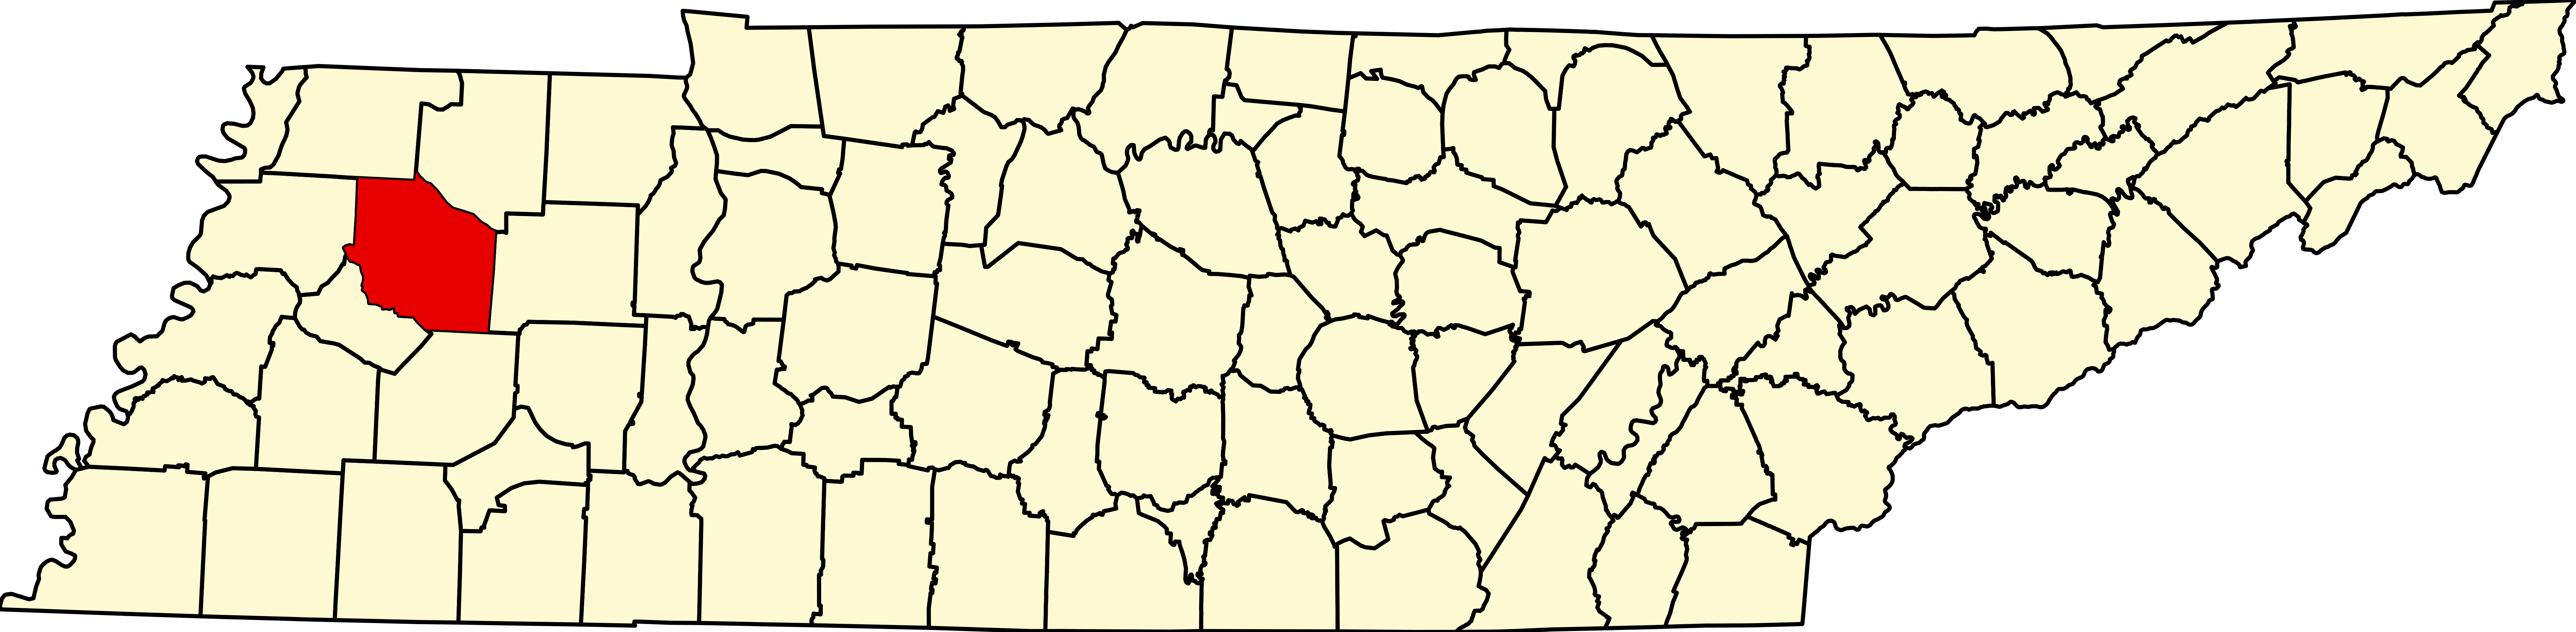 upload.wikimedia.org/wikipedia/commons/thumb/0/04/Map_of_Tennessee_highlighting_Gibson_County.svg/7814px-Map_of_Tennessee_highlighting_Gibson_County.svg.png